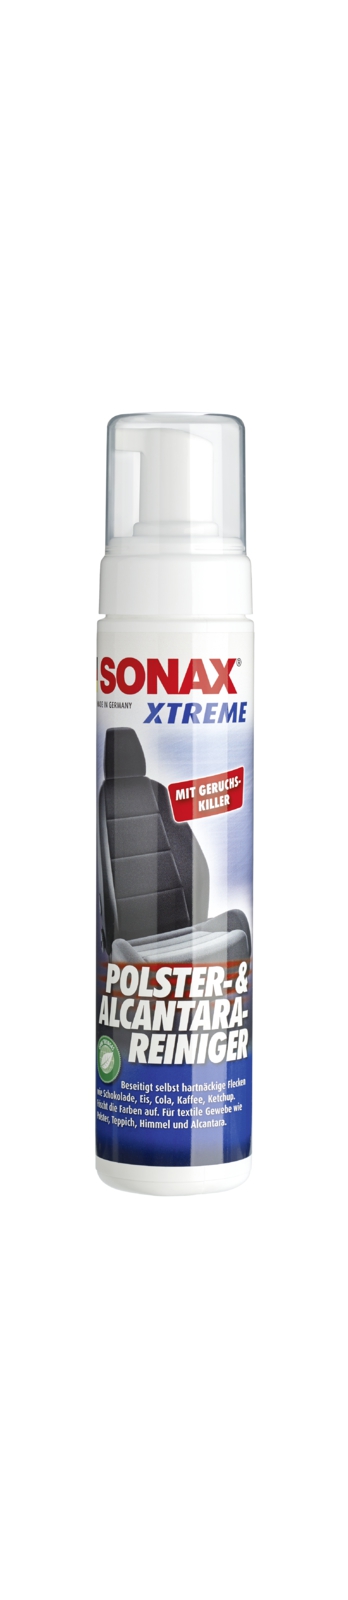 Nettoyant pour textiles/tapis Xtreme Upholstery & AlcantaraCleaner propellant-free | SONAX